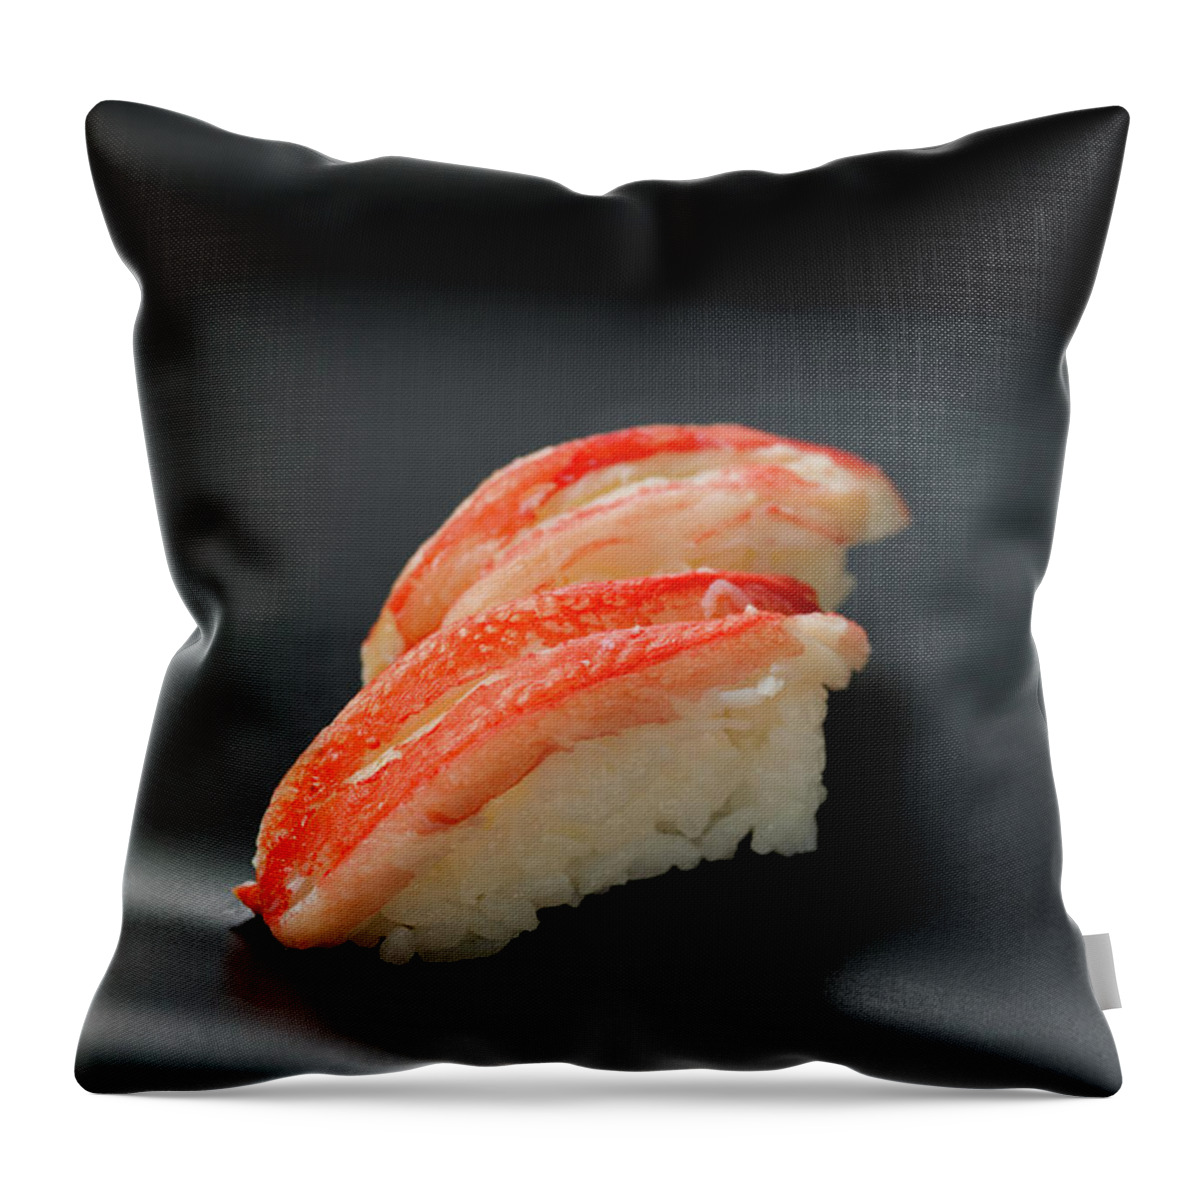 Two Objects Throw Pillow featuring the photograph Sushi Kani by Ryouchin